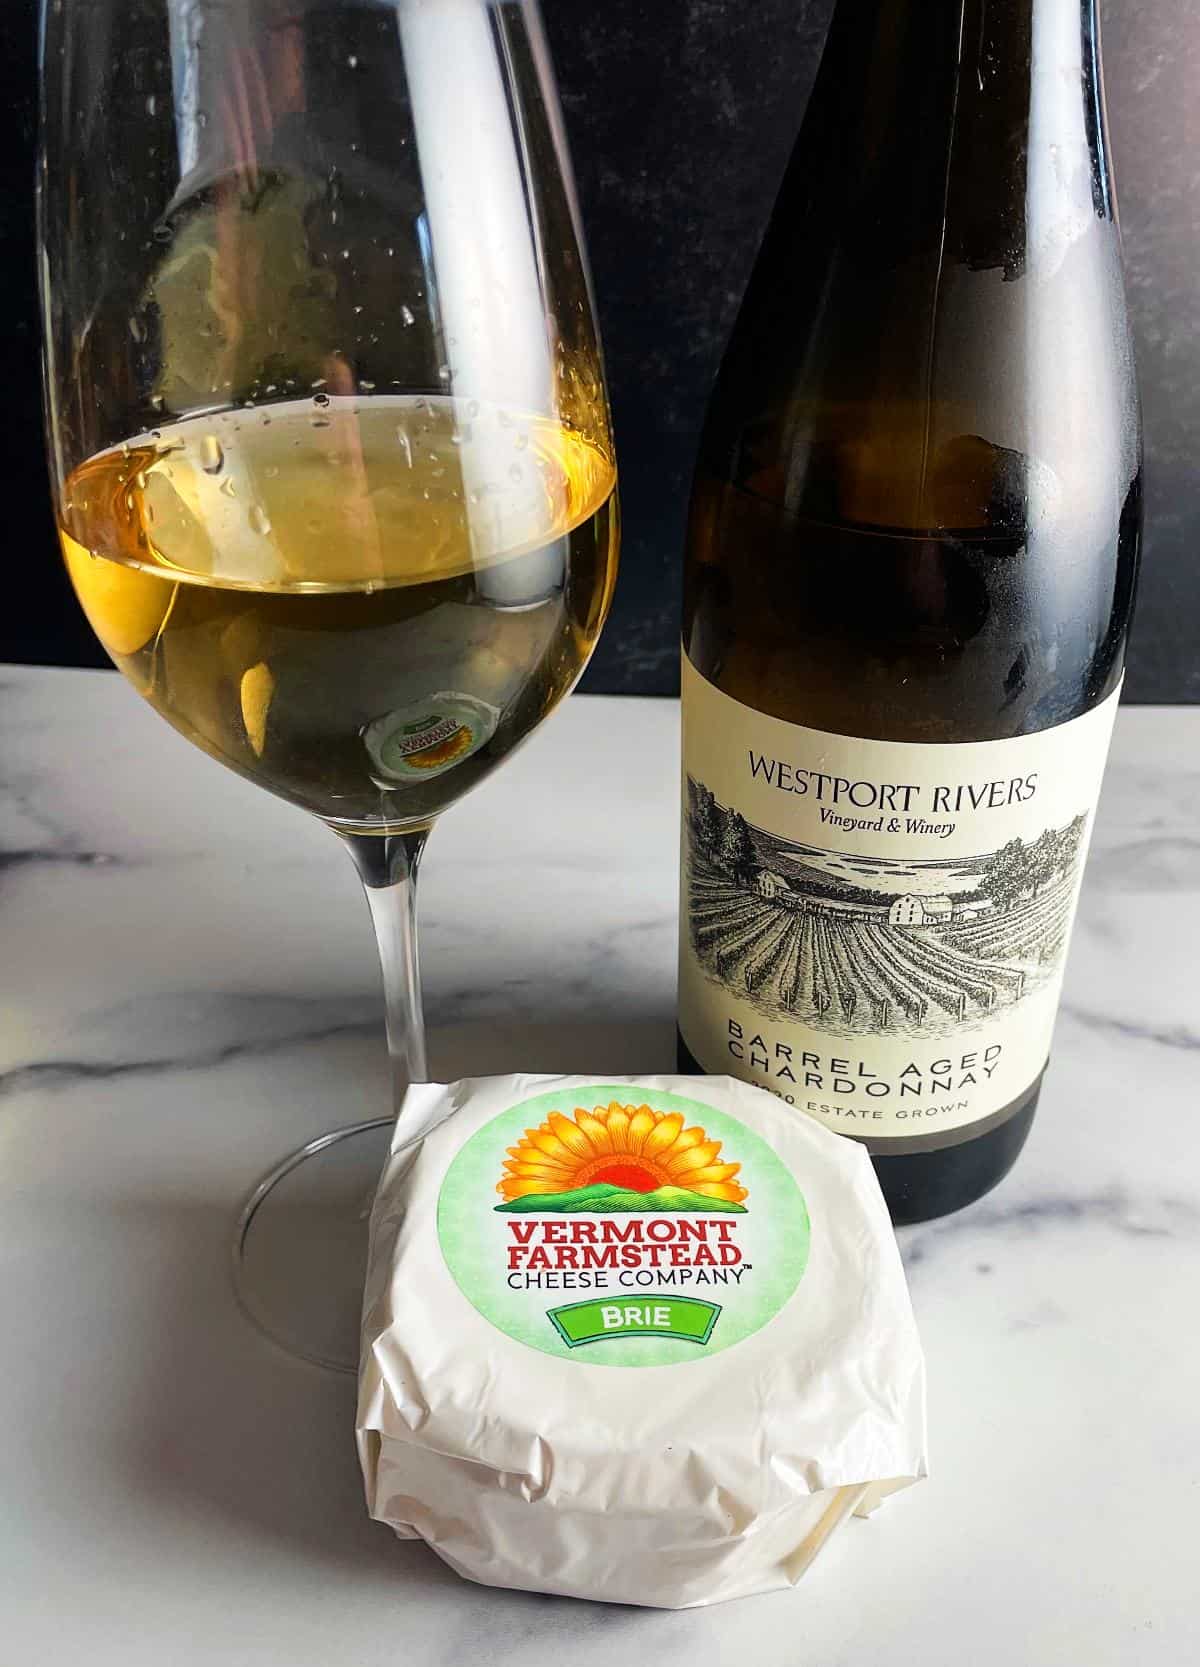 a package of Vermont Farmstead Brie along with a bottle and glass of Westport Rivers Chardonnay.